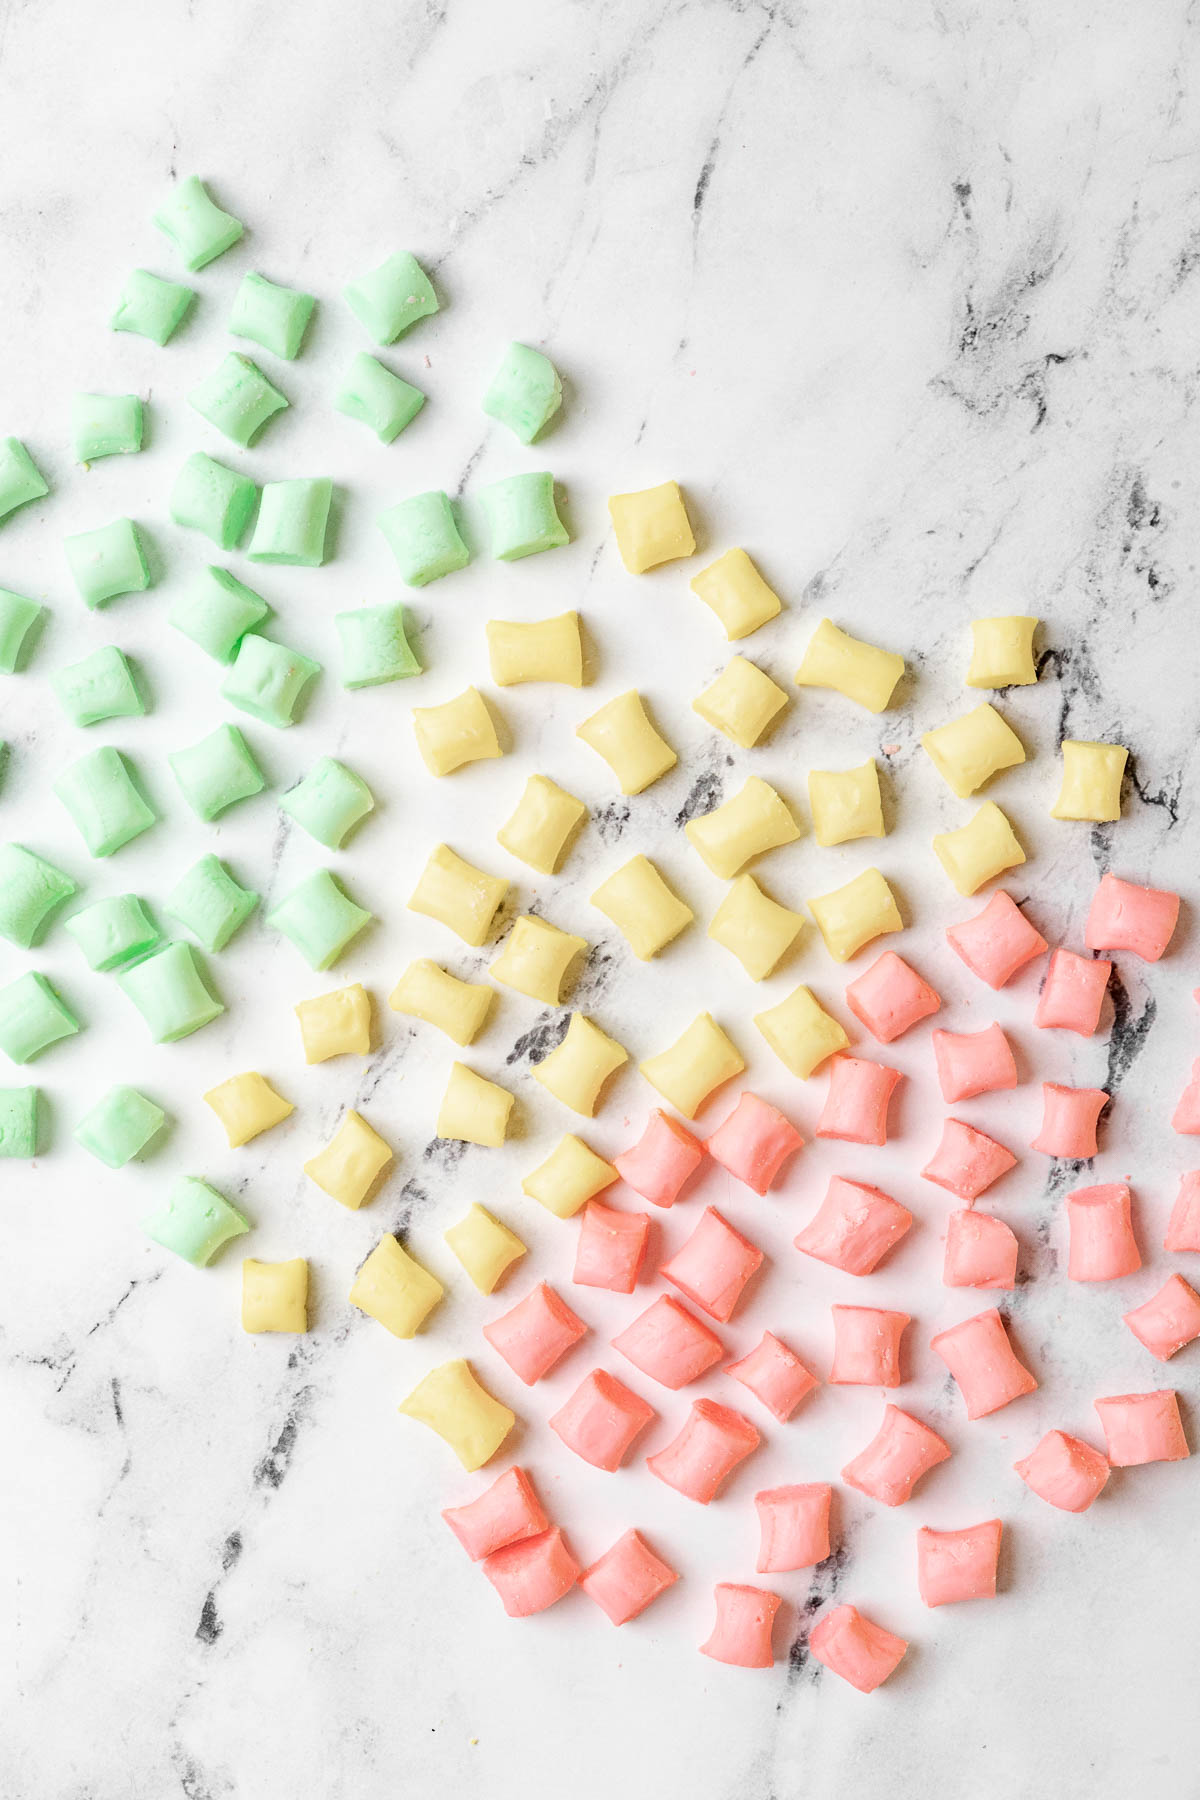 Butter Mints pink yellow and green mints on marble surface